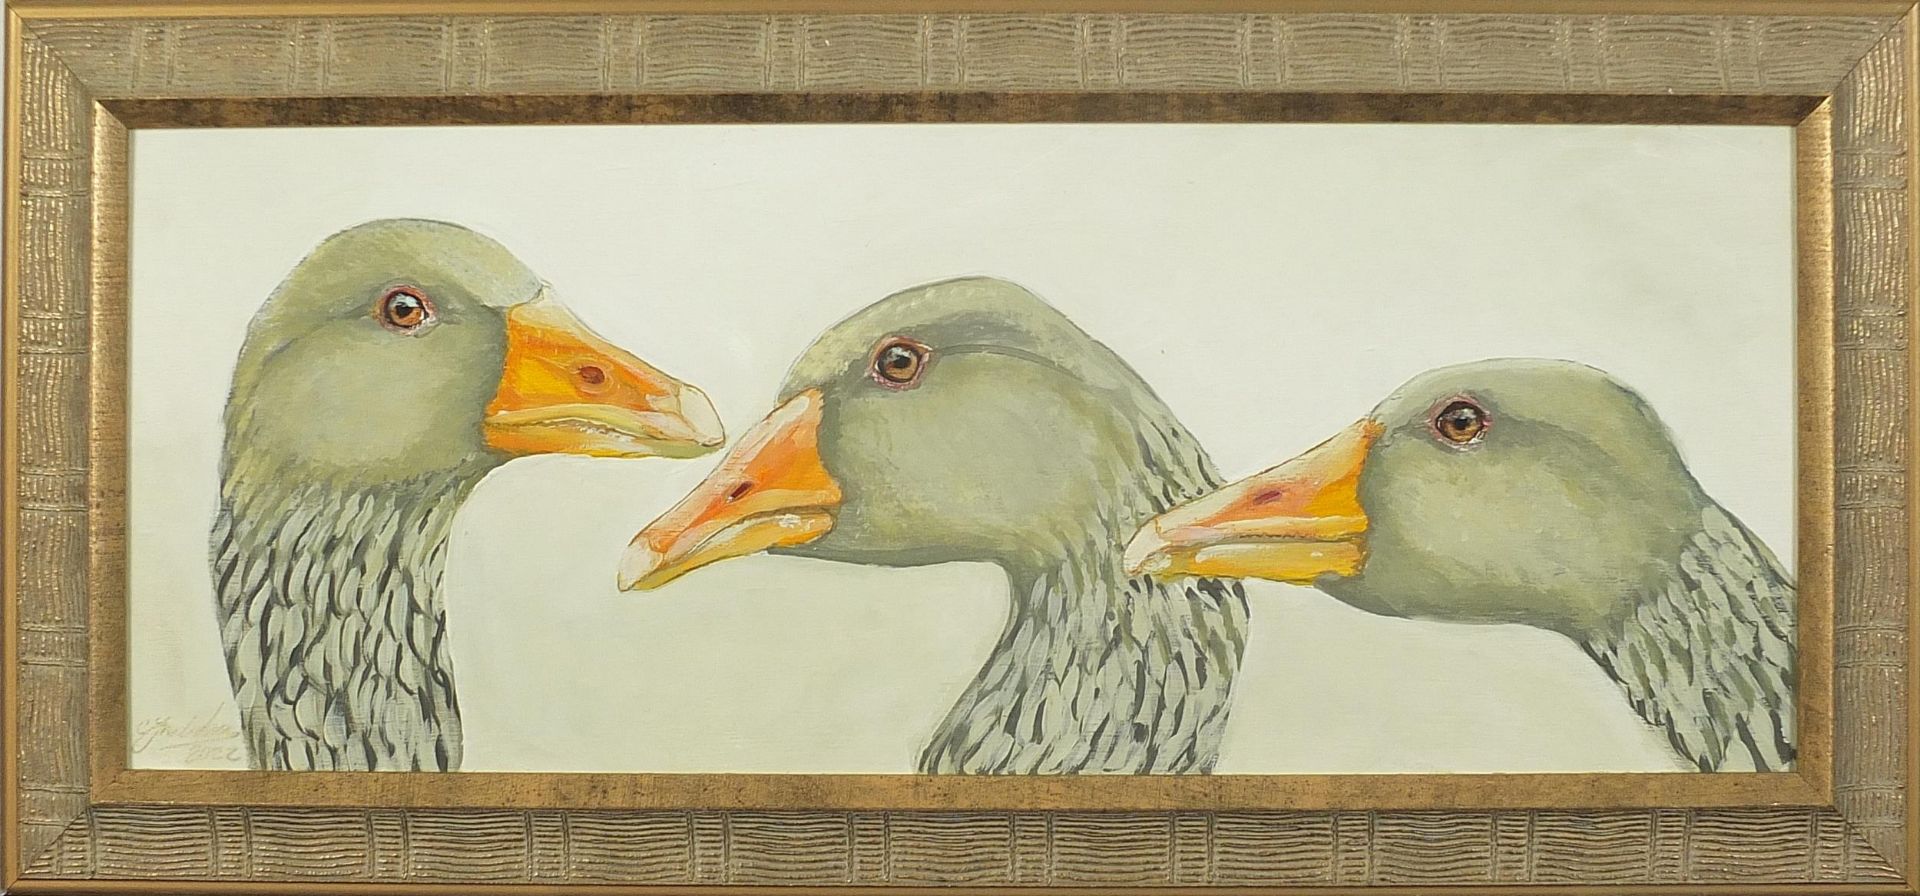 Clive Fredriksson - Greylag geese, oil on board, framed, 49.5cm x 20cm excluding the frame - Image 2 of 4